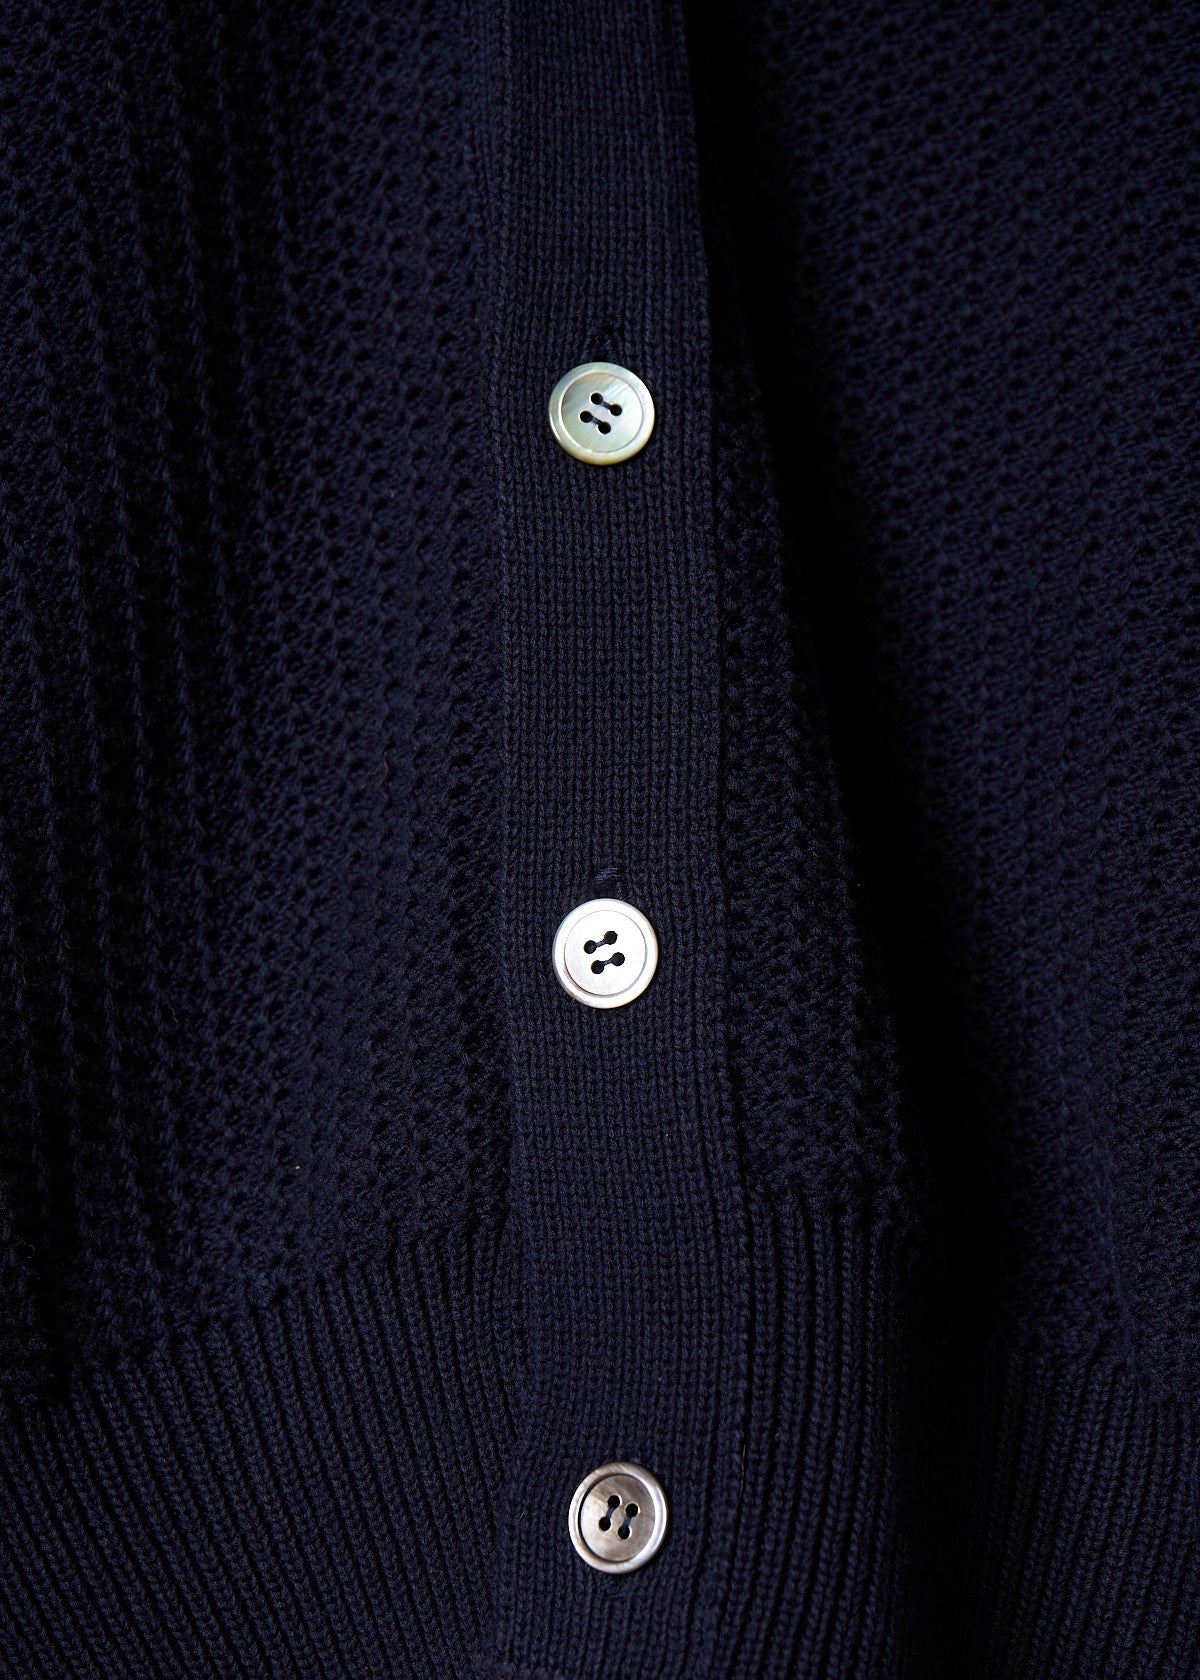 CDG Homme Navy Textured 5 Button Cotton Cardigan 1980's - Large